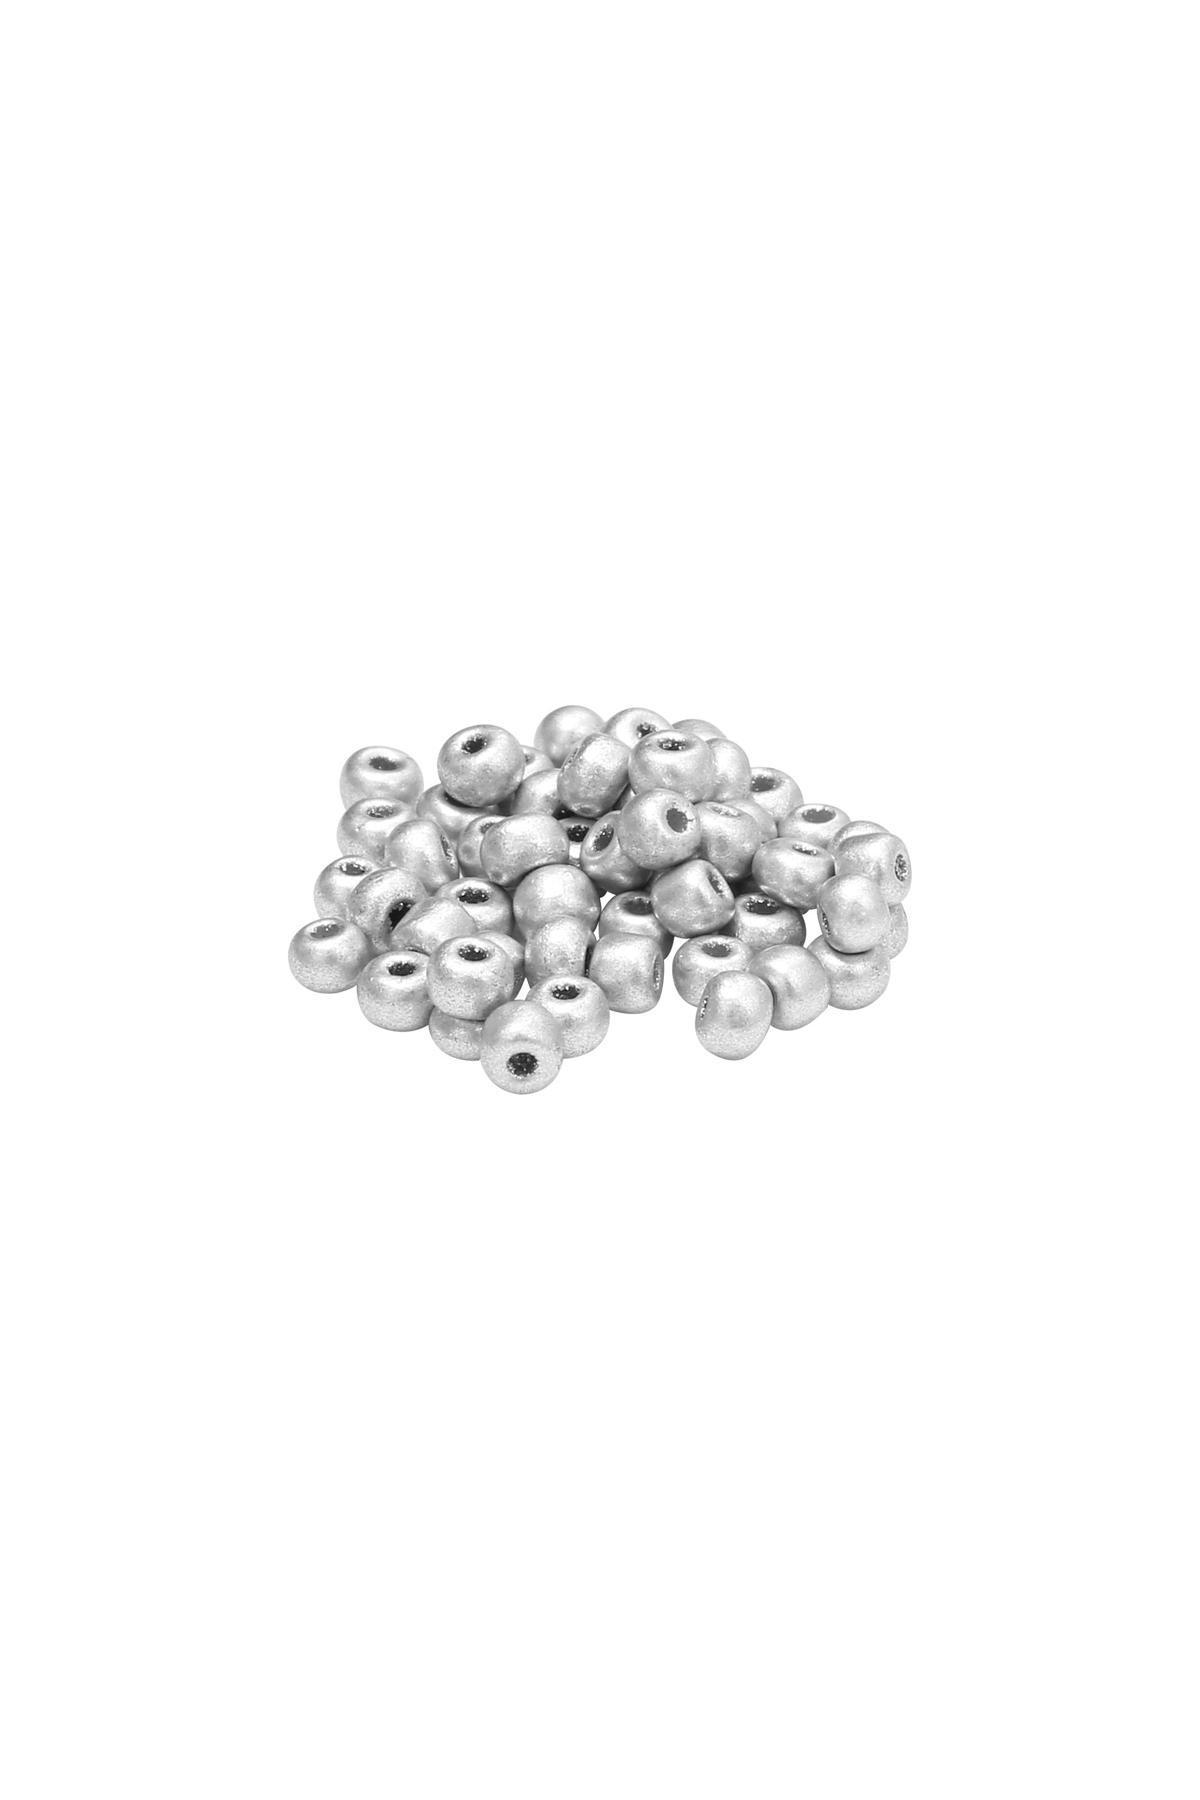 DIY Beads Coloured - 3MM Silver Plastic